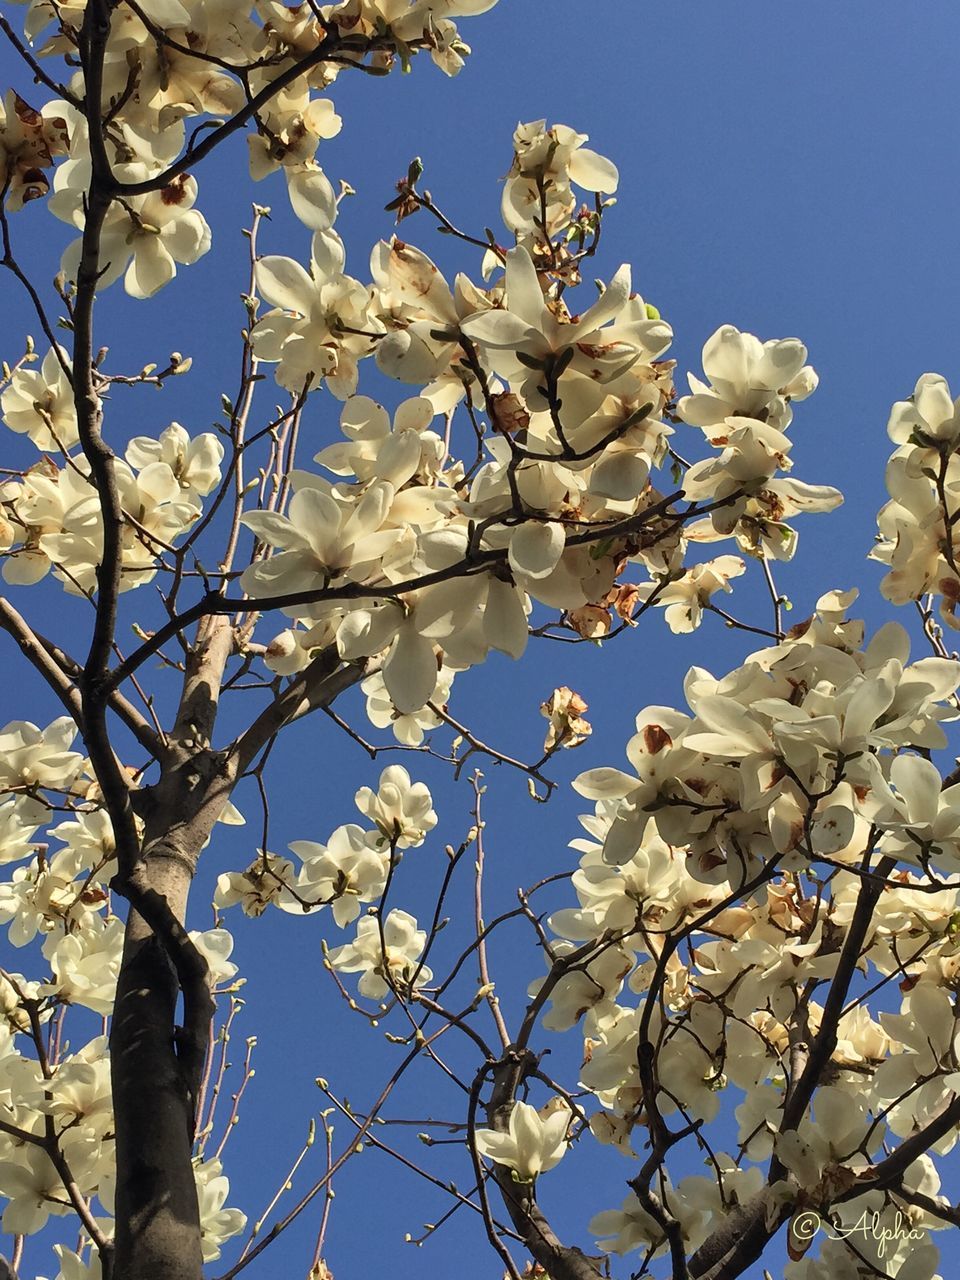 flower, branch, tree, nature, beauty in nature, fragility, low angle view, growth, blossom, springtime, magnolia, botany, no people, day, freshness, outdoors, clear sky, flower head, close-up, sky